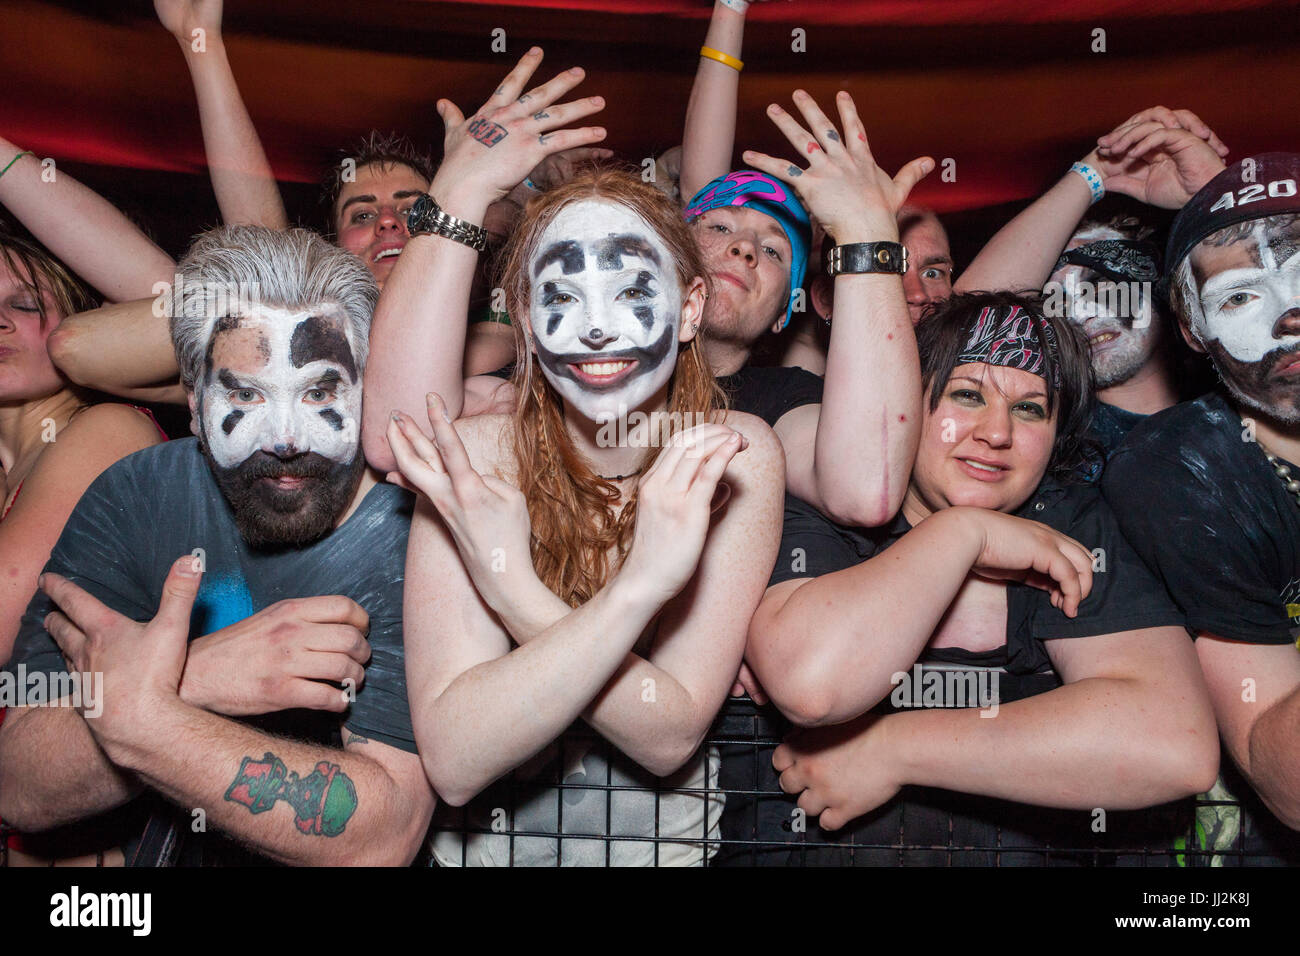 Juggalos (Insane Clown Posse fans) at an ICP concert at the Eagle/Rave club in Milwaukee, Wisconsin. Stock Photo